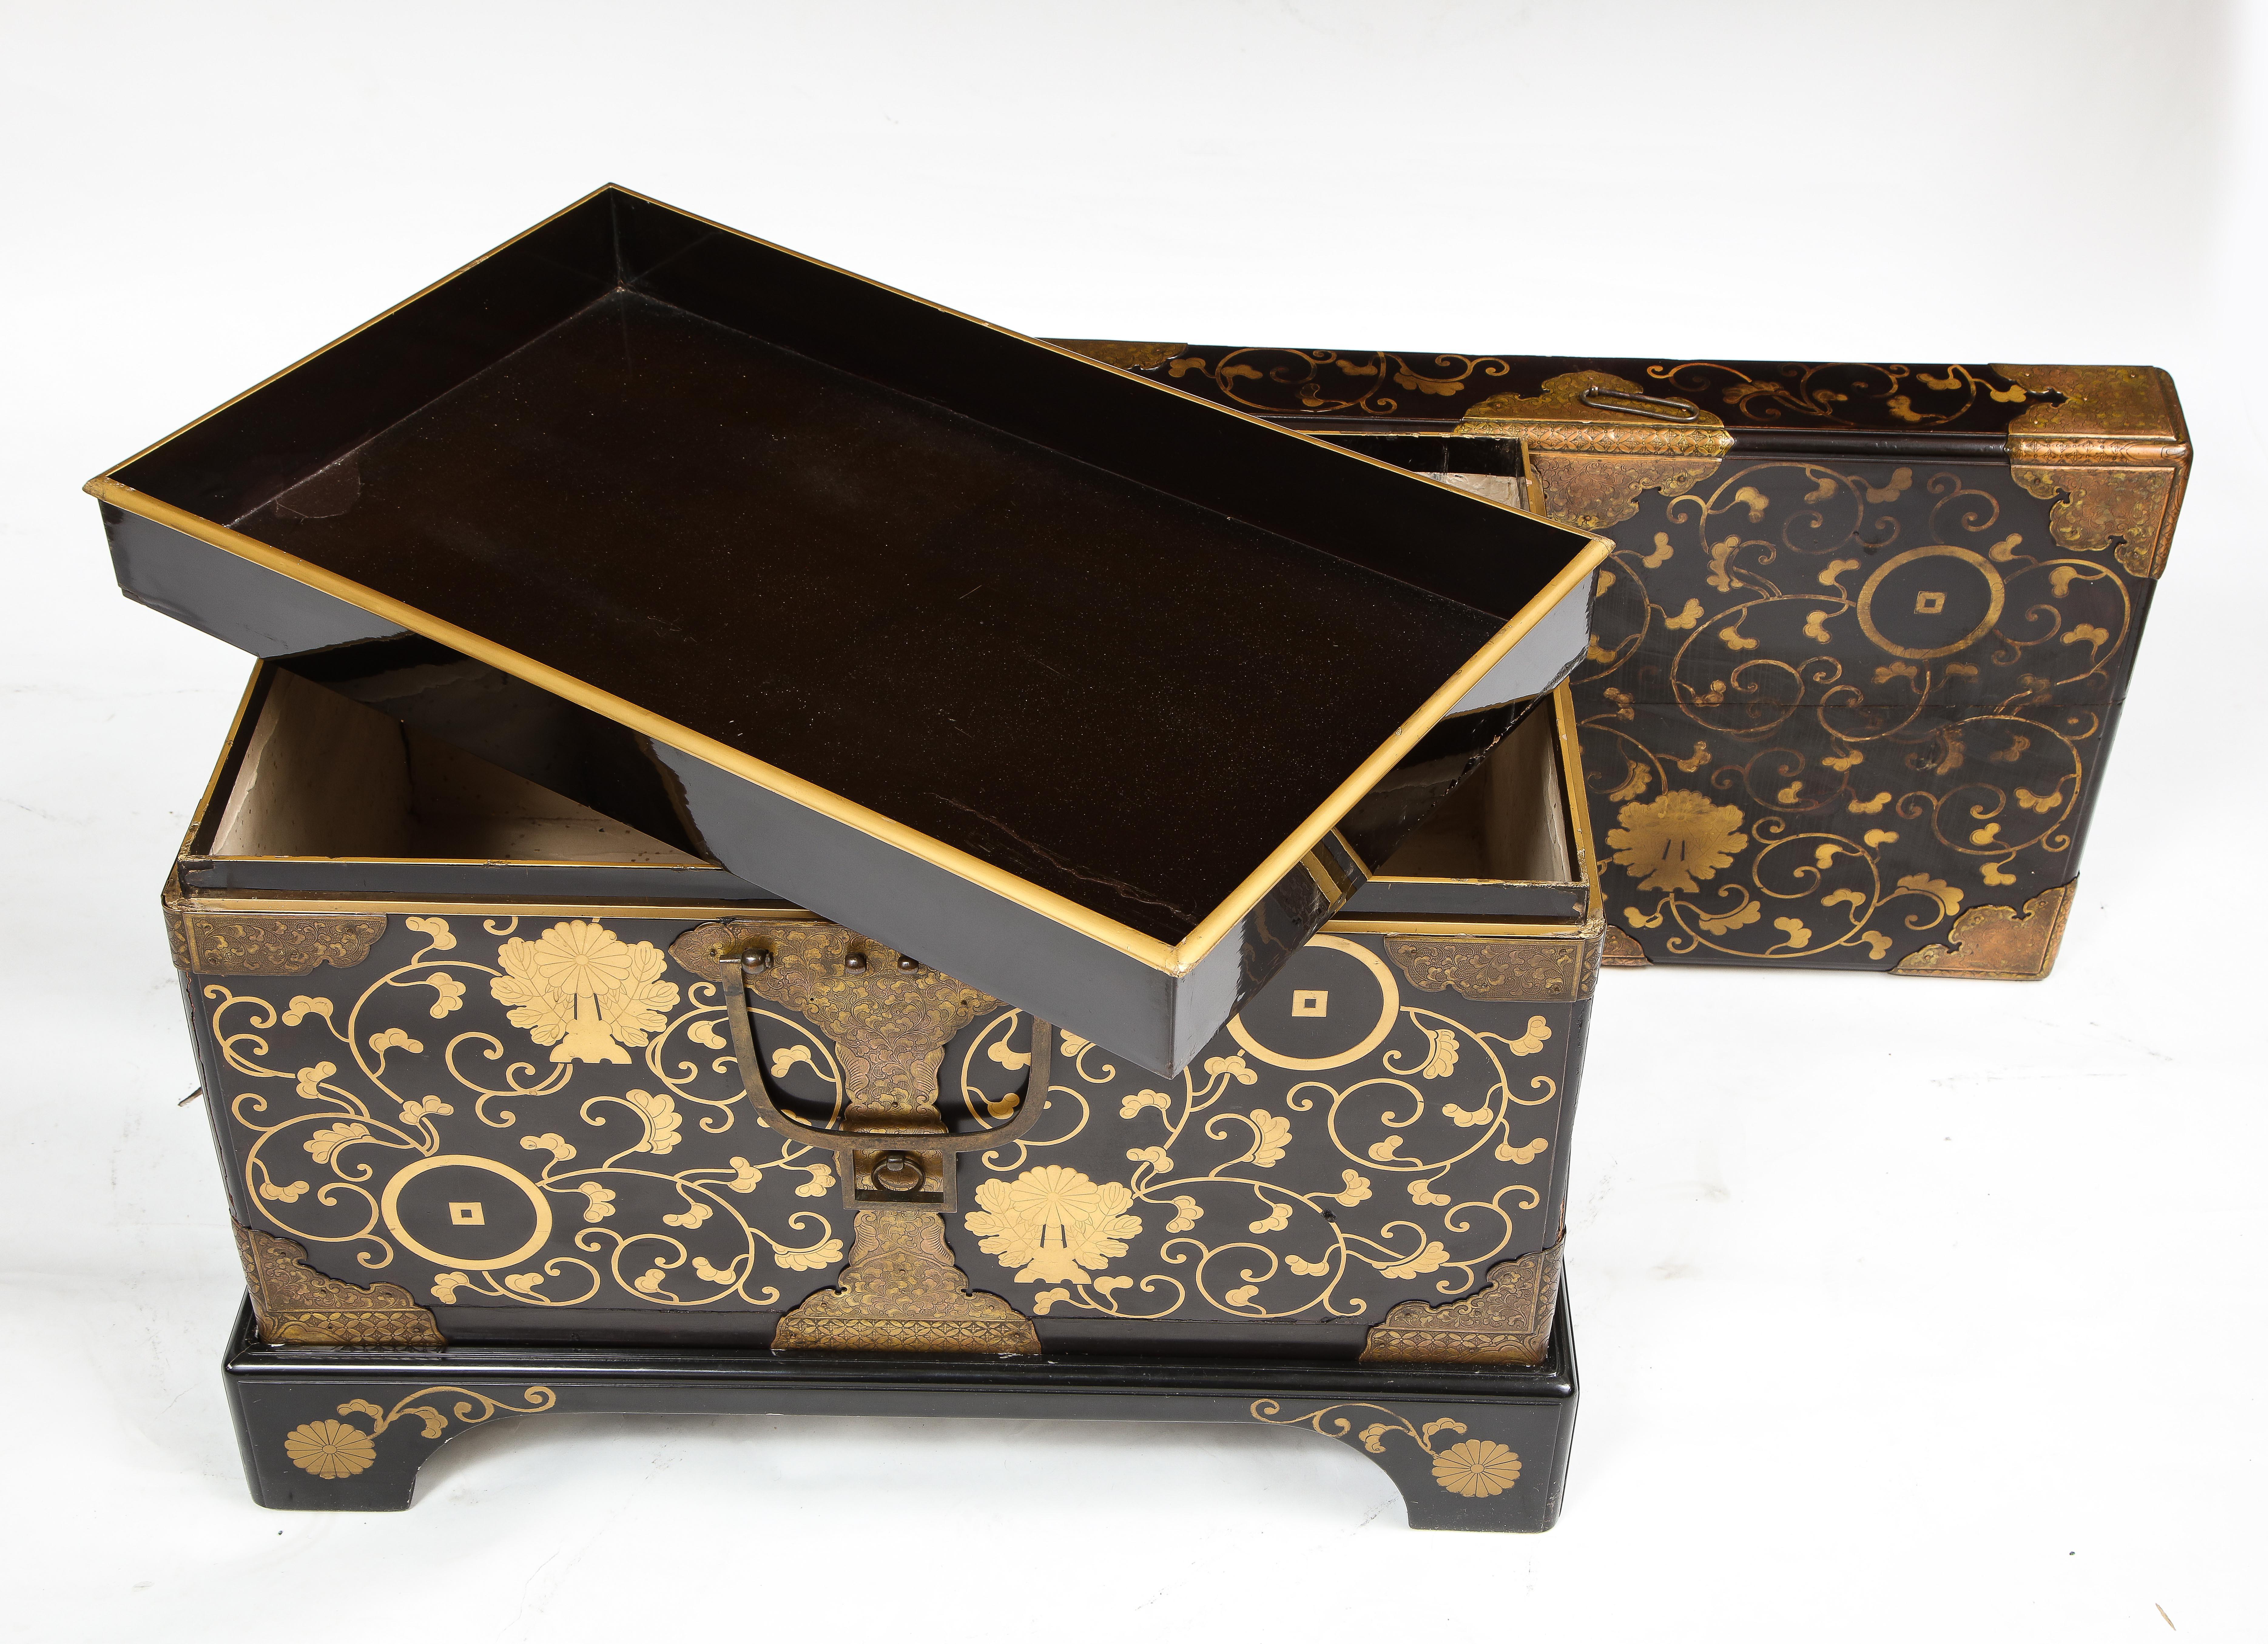  Pair of 19th Century Japanese Meiji Period Dore Bronze Mounted Lacquered Chests For Sale 11